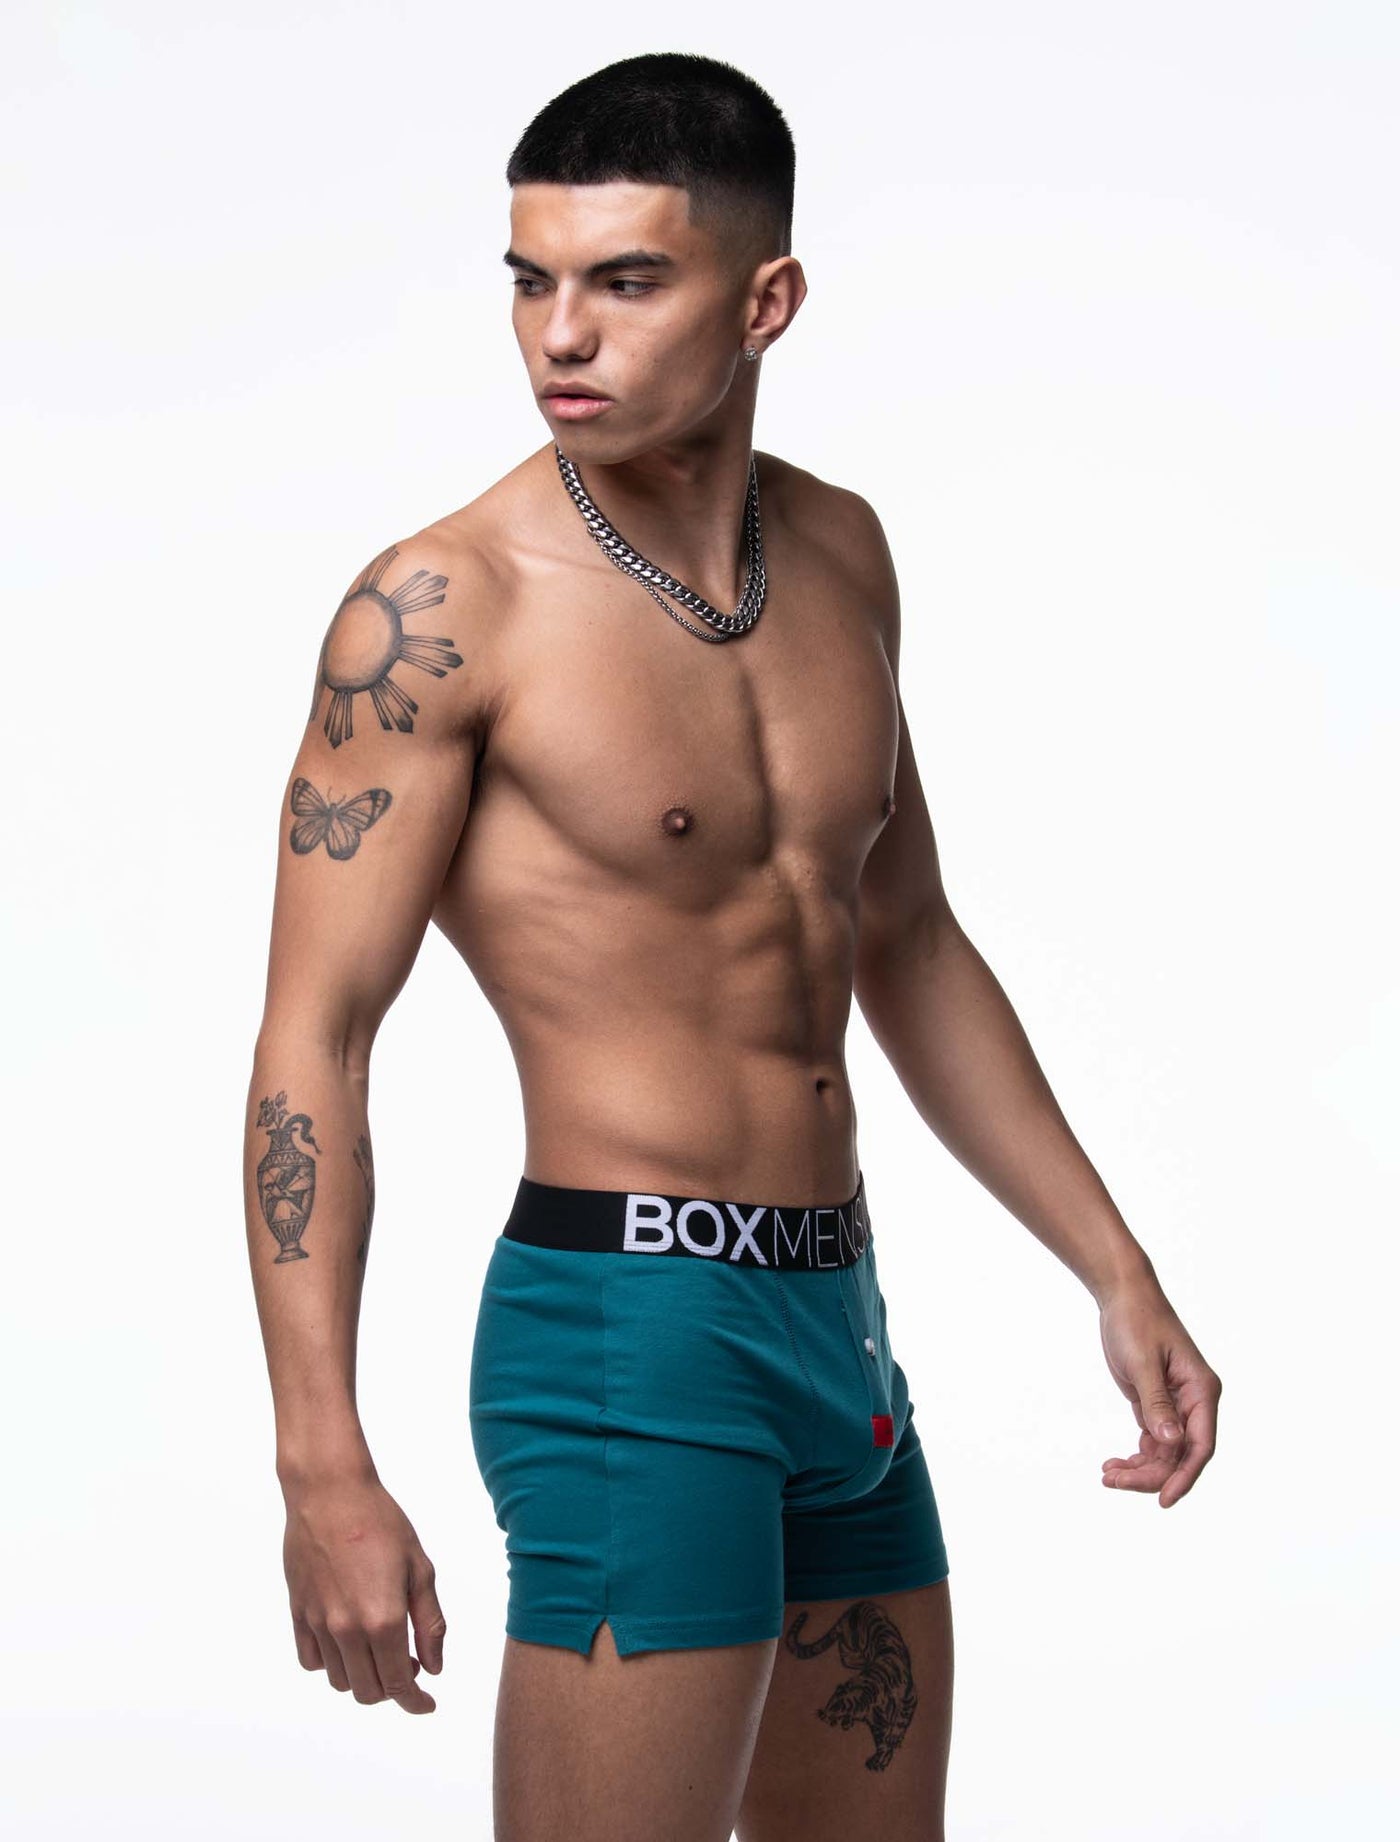 Button-up Boxers - Tease Me Teal